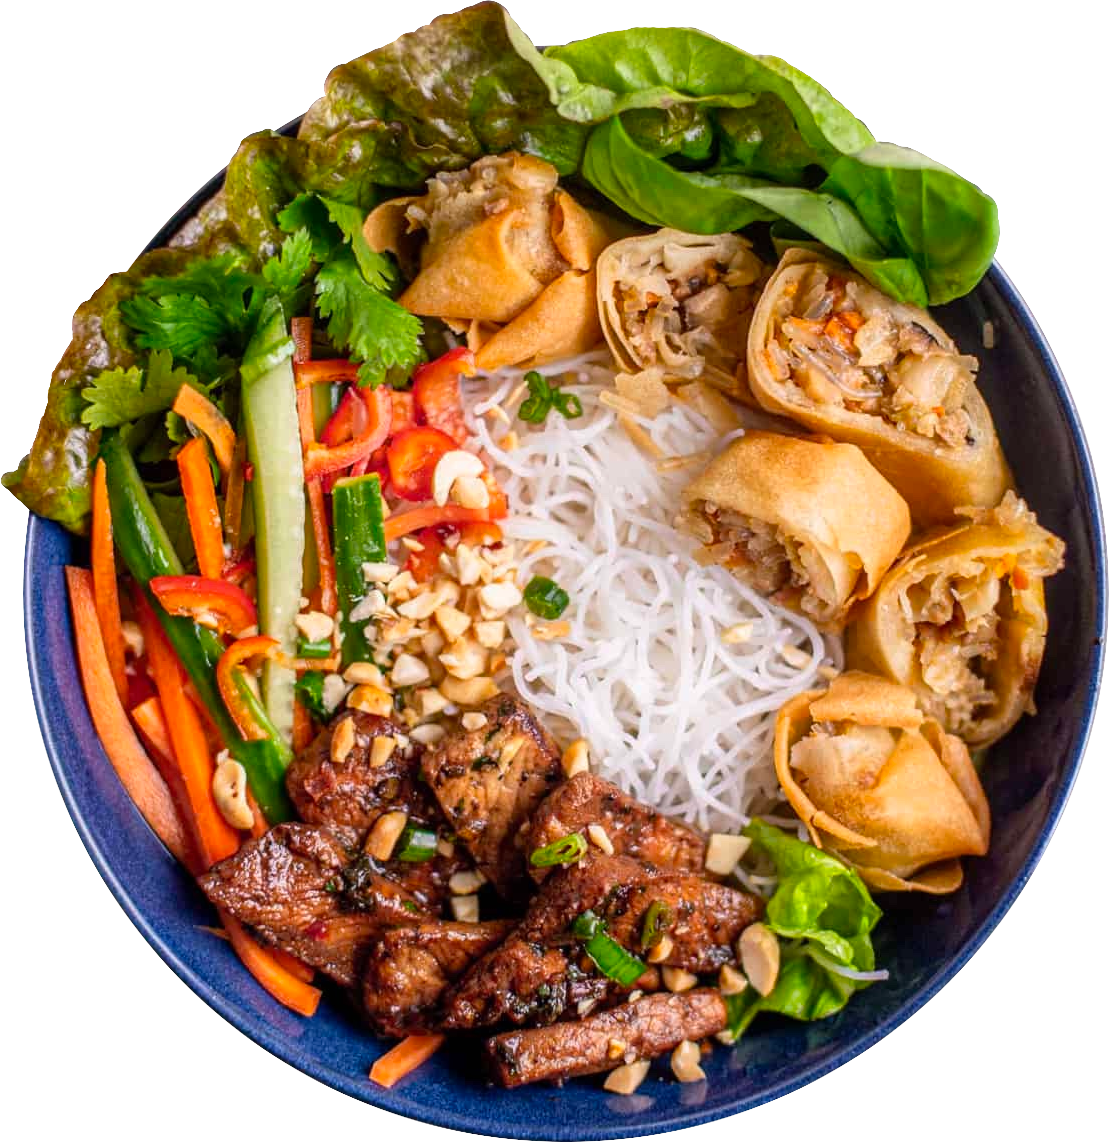 A Vietnamese bun filled with vegetables and vermicelli.